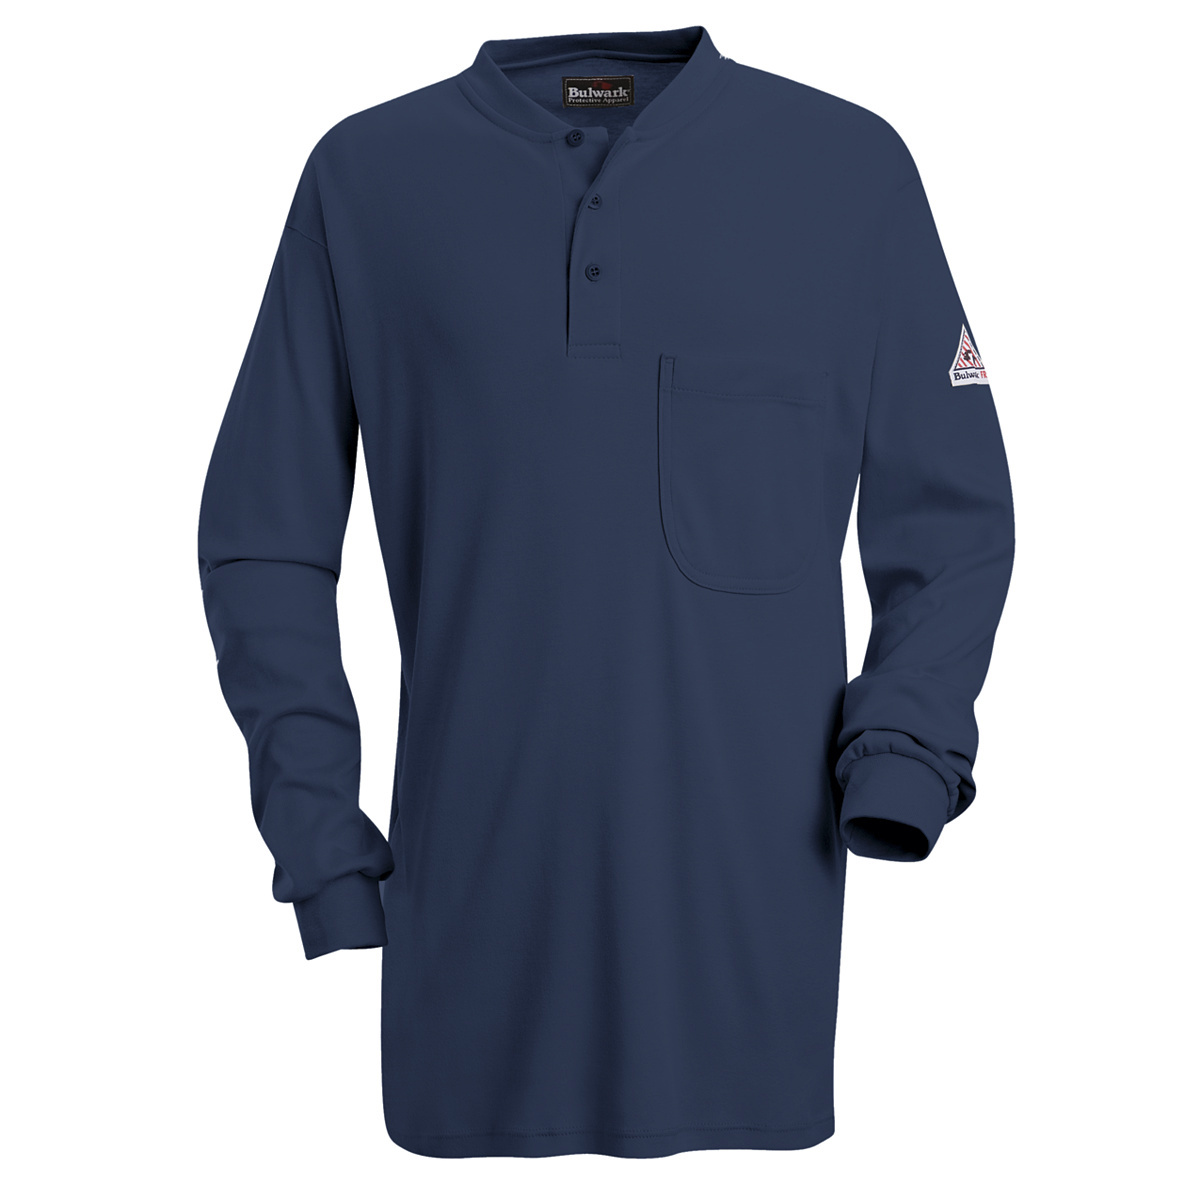 Bulwark® Large Tall Navy Blue EXCEL FR® Interlock FR Cotton Flame Resistant Henley Shirt With Button Front Closure